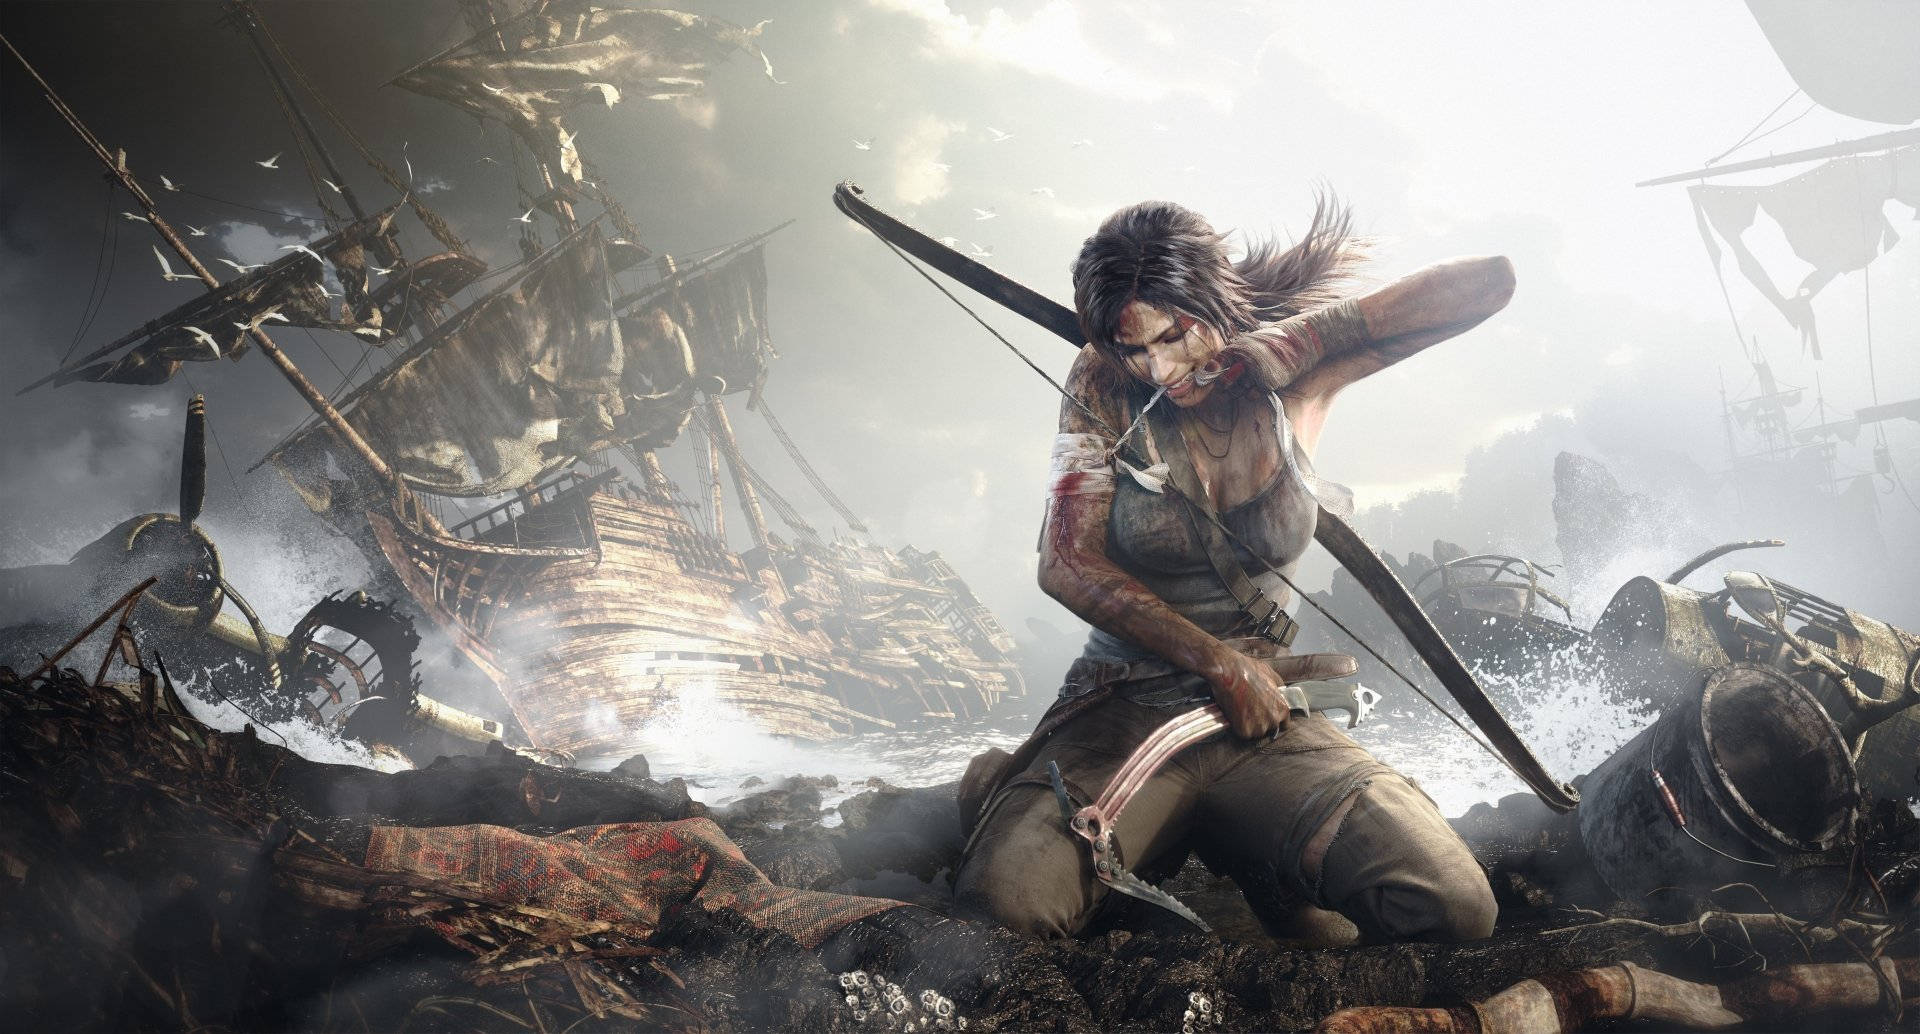 Explore The Uncharted Land In The Adventure Game Of Tomb Raider Wallpaper